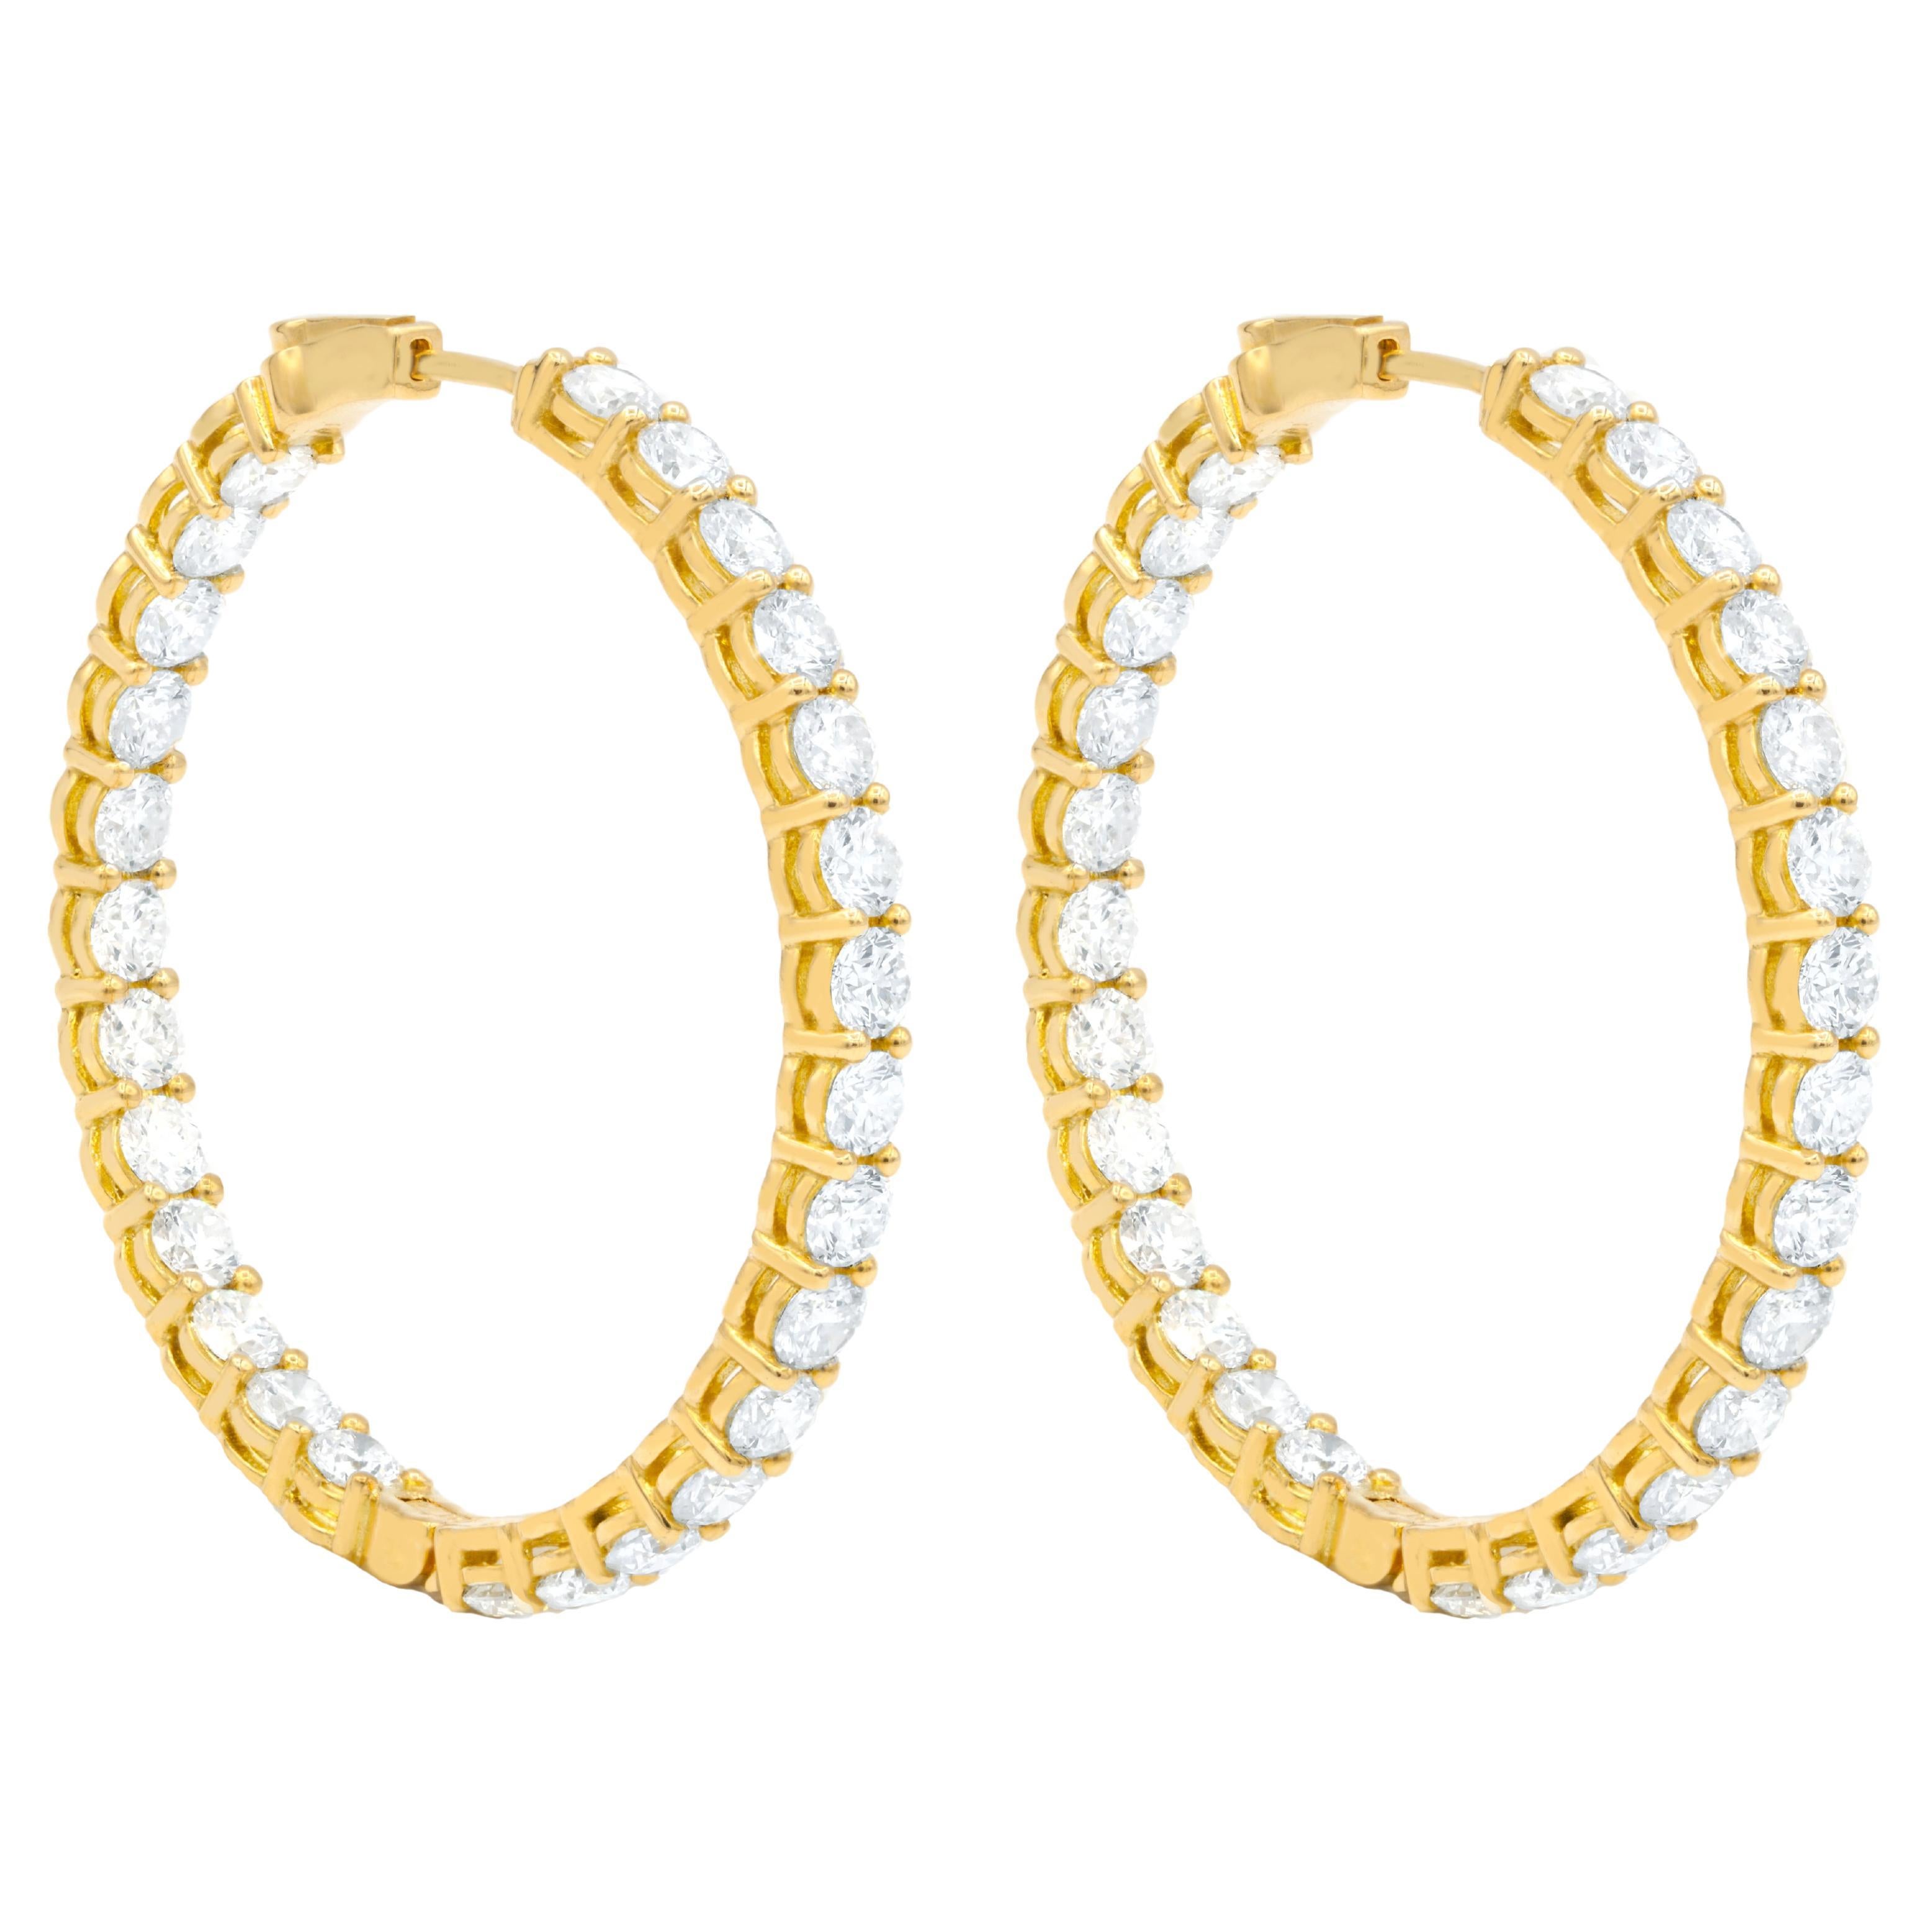 Diana M.18 kt yellow gold, 1.75" inside-out hoop earrings adorned with 10.30 cts For Sale